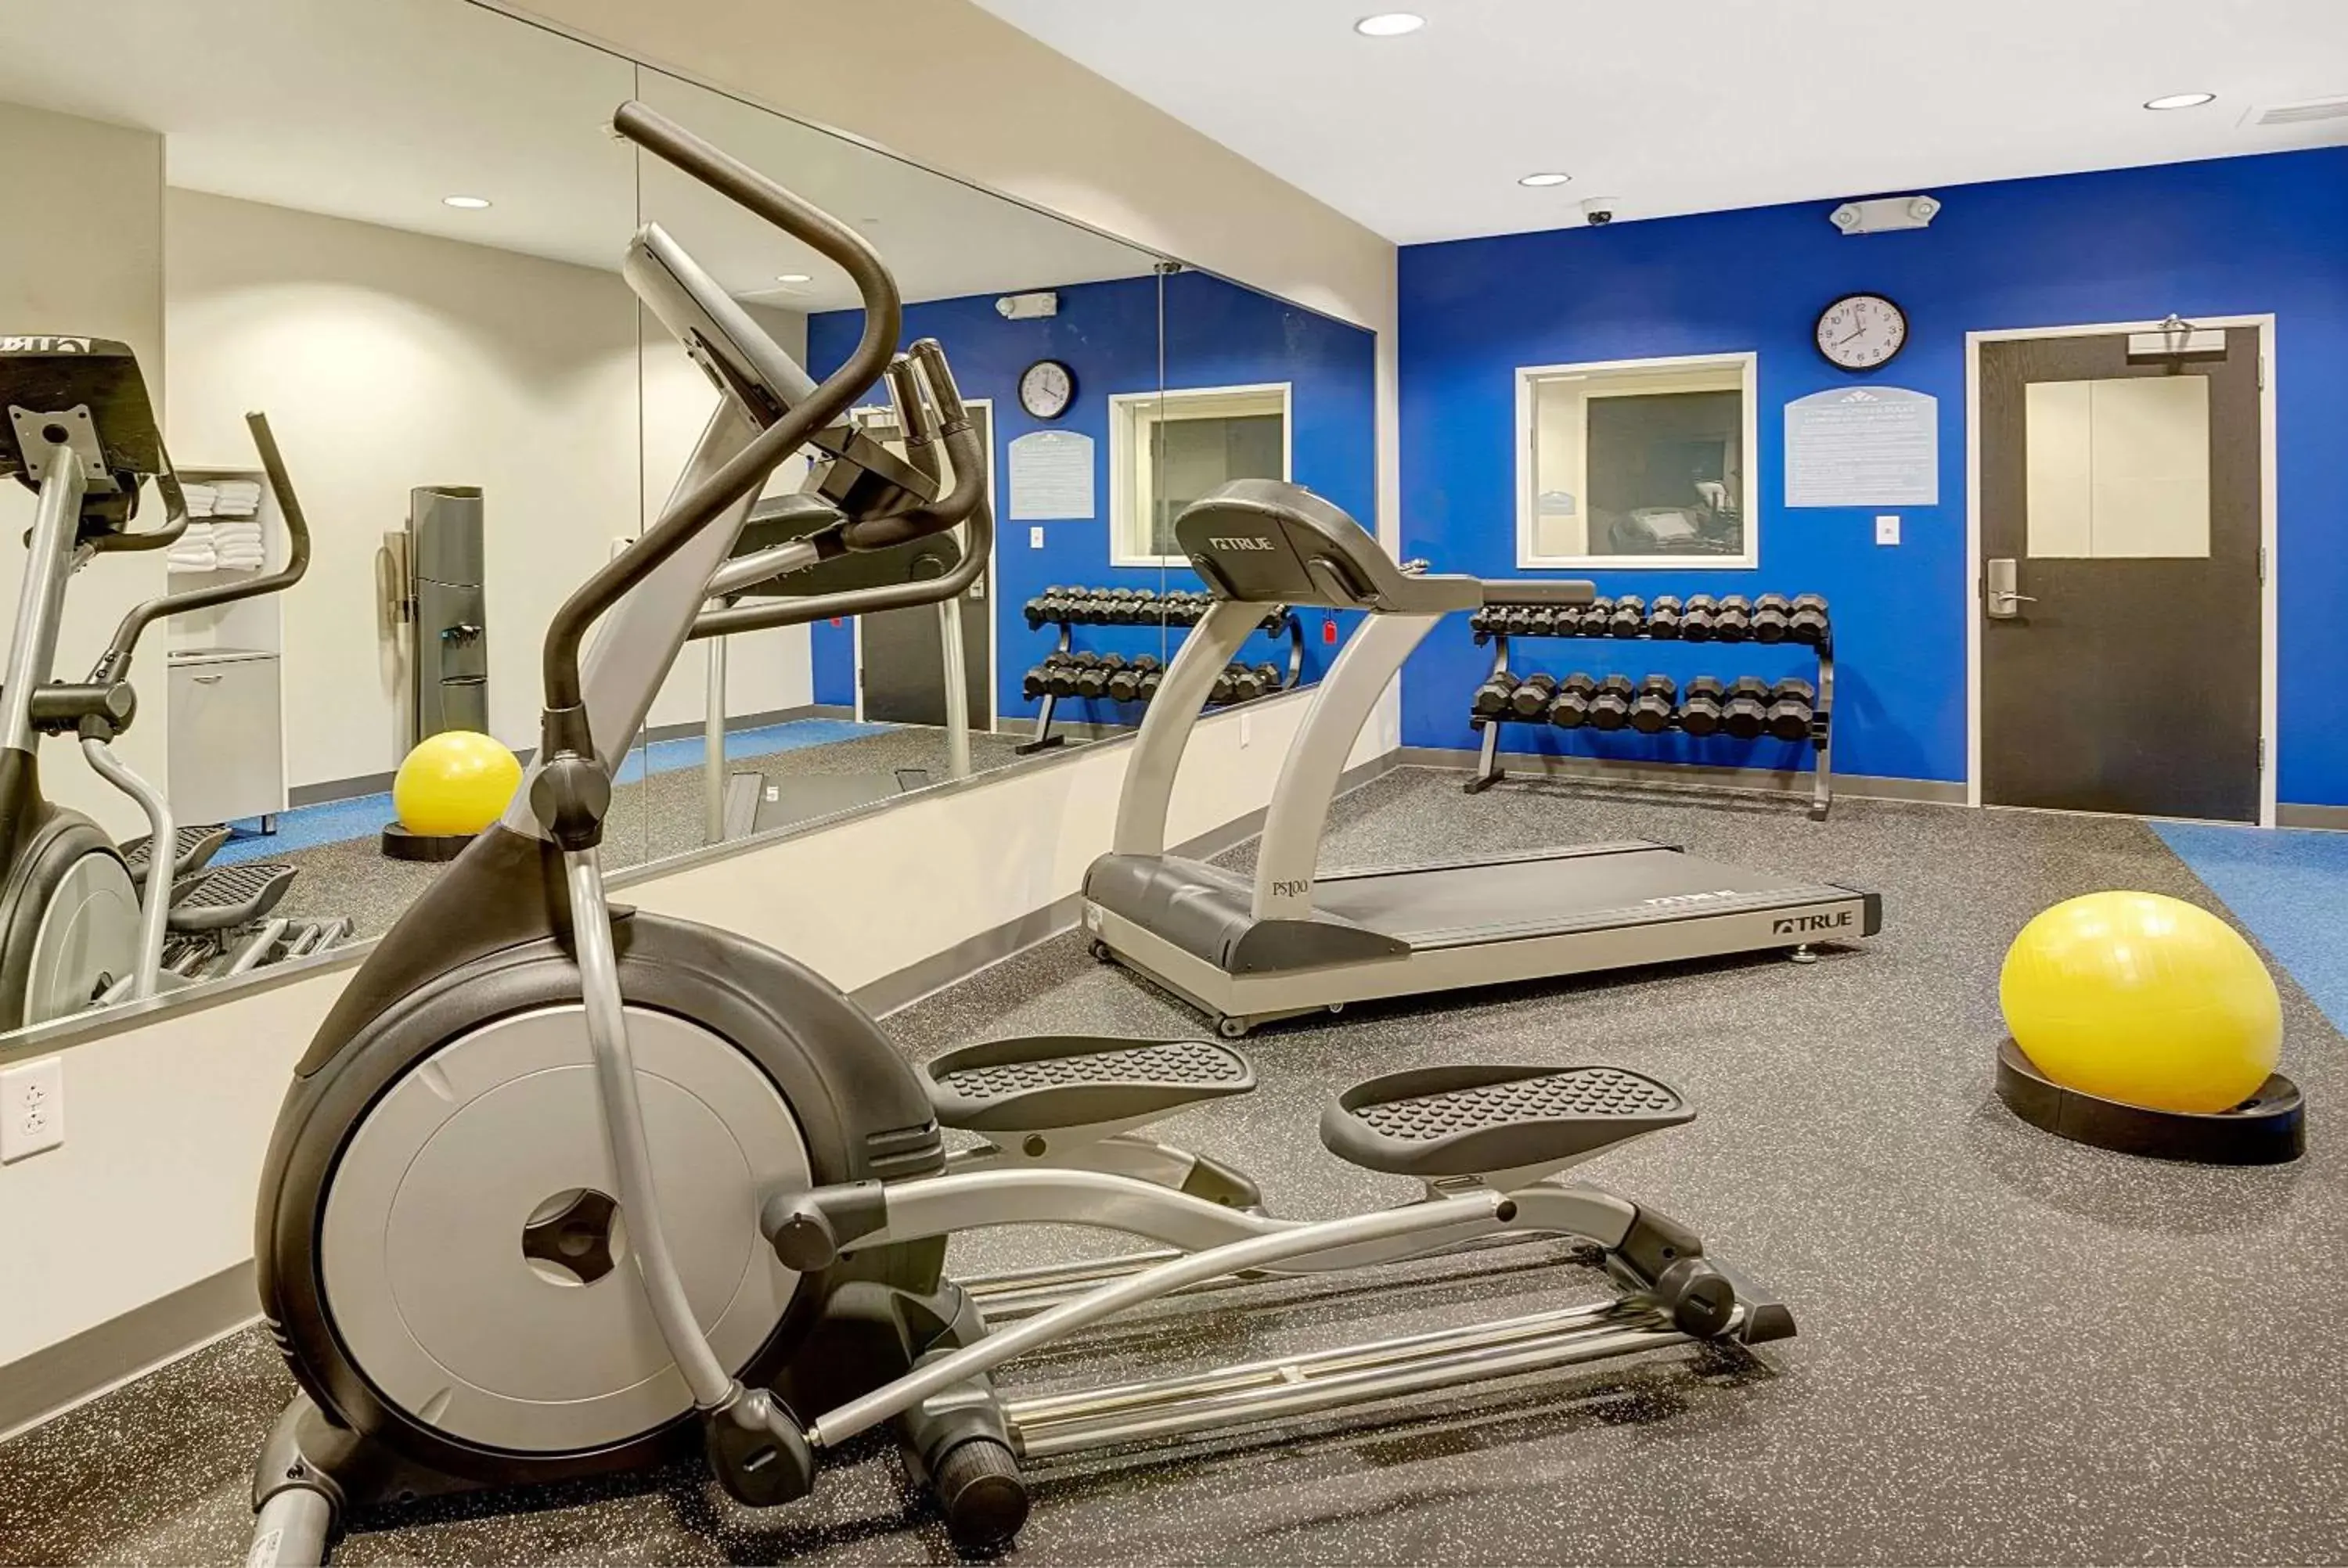 Fitness centre/facilities, Fitness Center/Facilities in Microtel Inn & Suites by Wyndham Philadelphia Airport Ridley Park